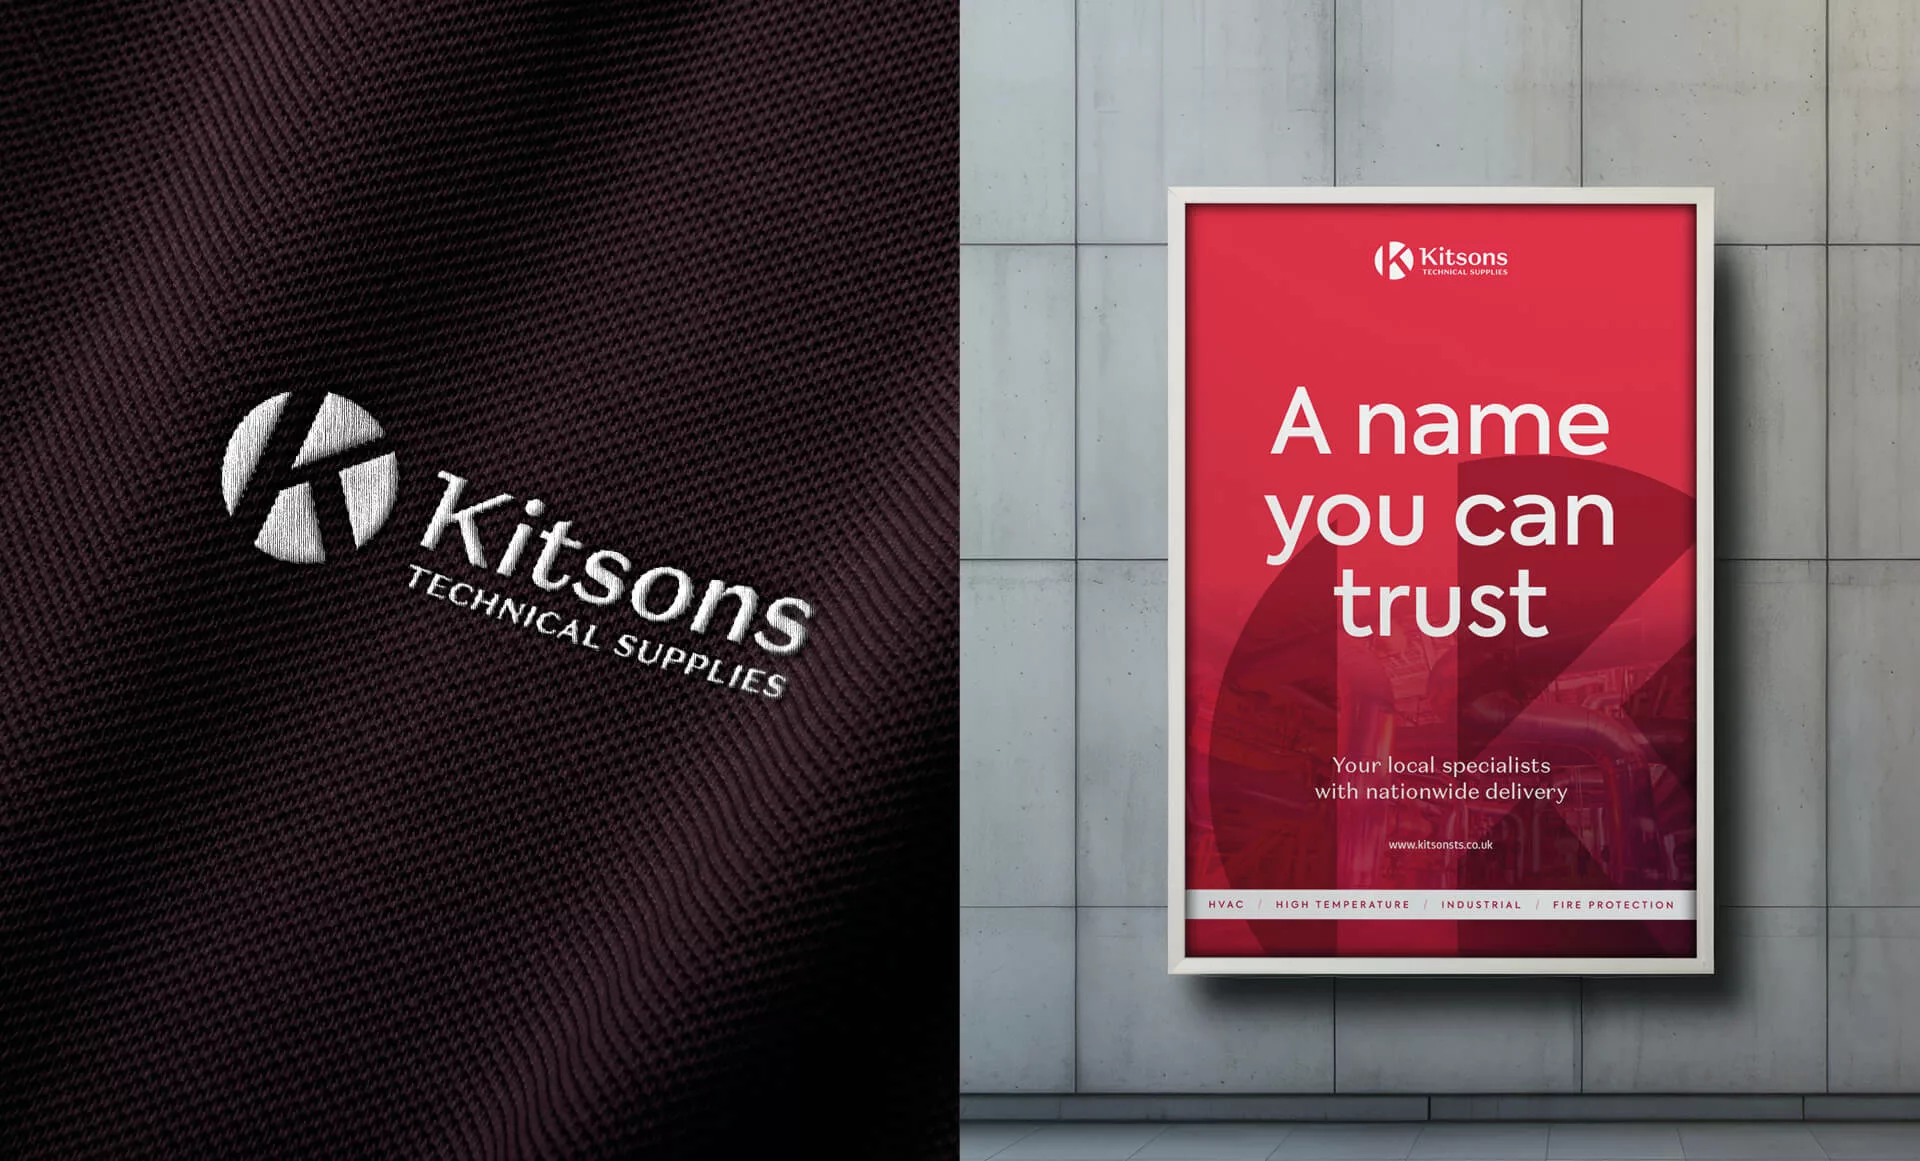 Kitsons branding on a piece of clothing alongside a framed poster